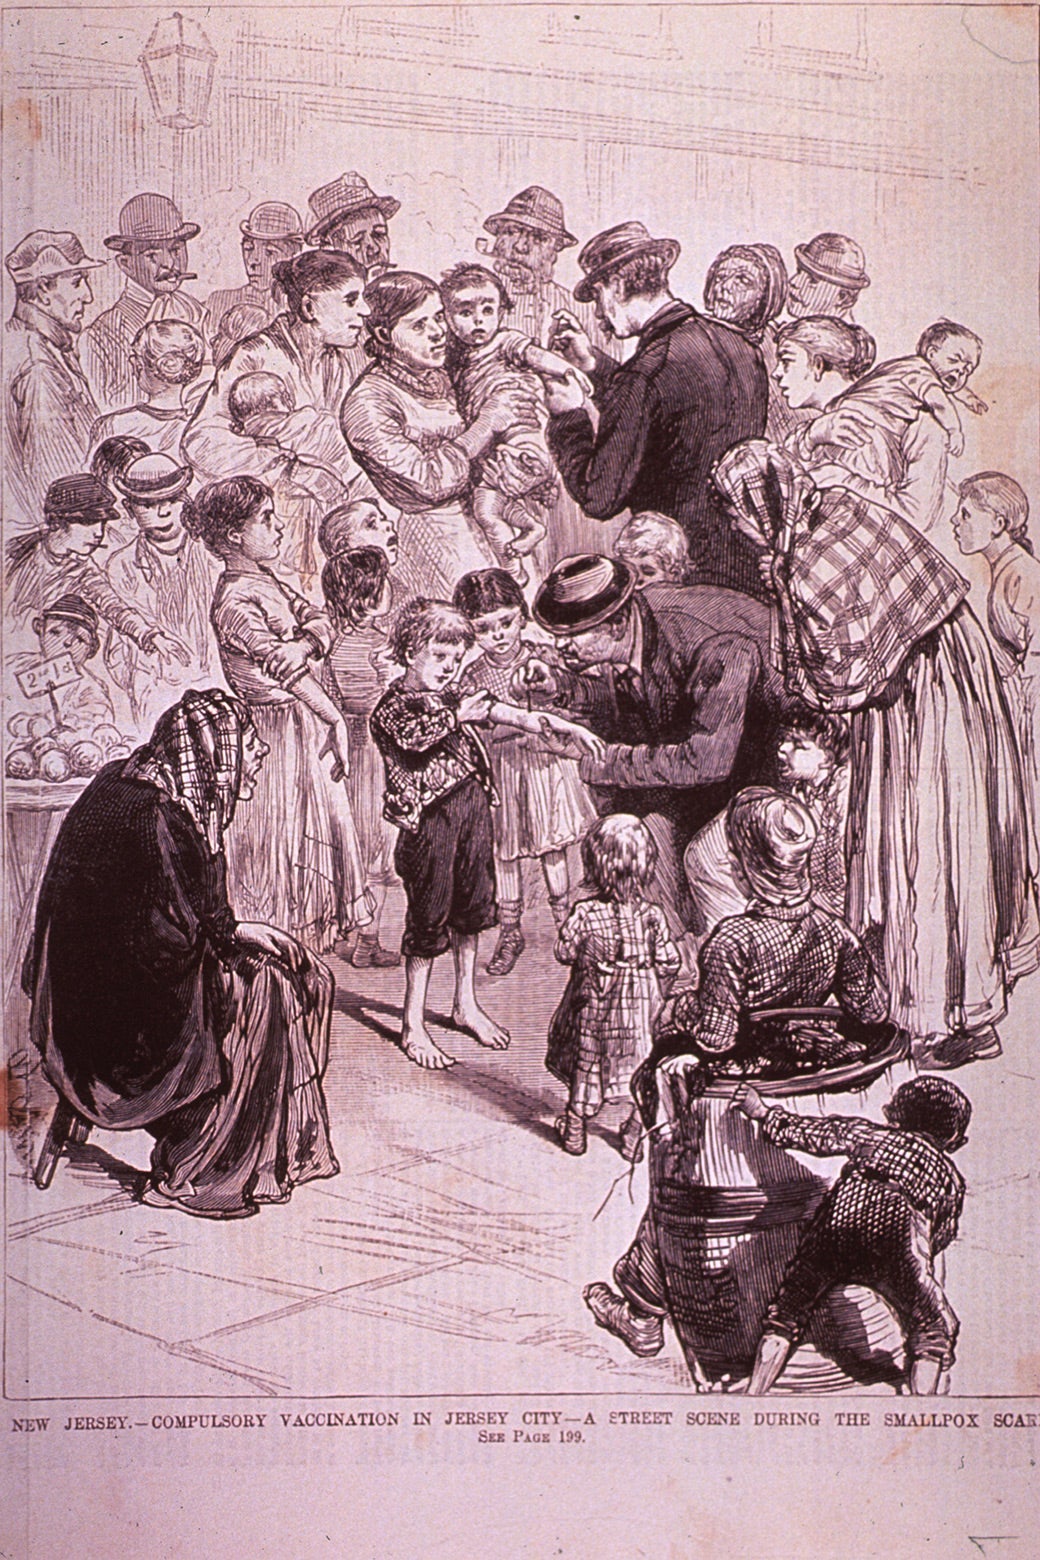 A drawing of a boy being vaccinated on a city street as people look on.